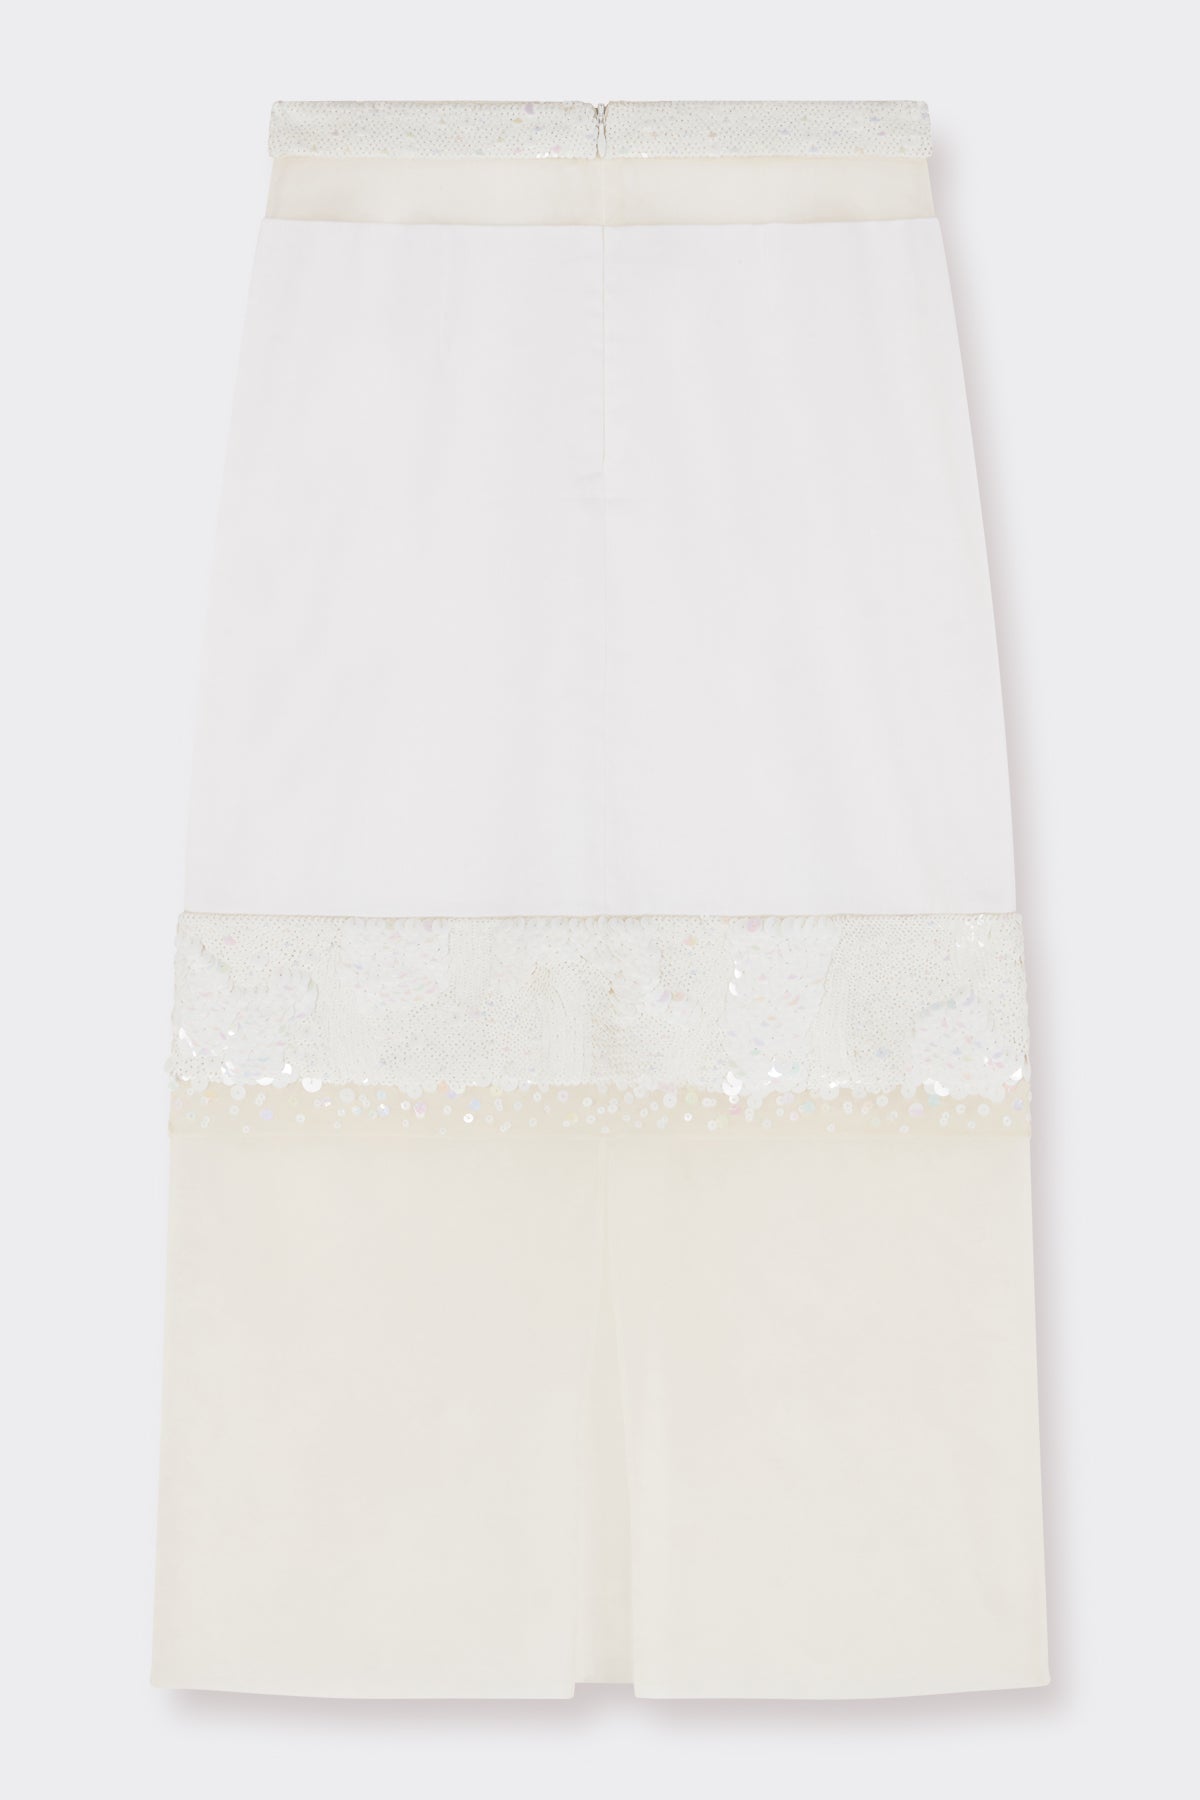 Halima Skirt in Soft White | Noon By Noor